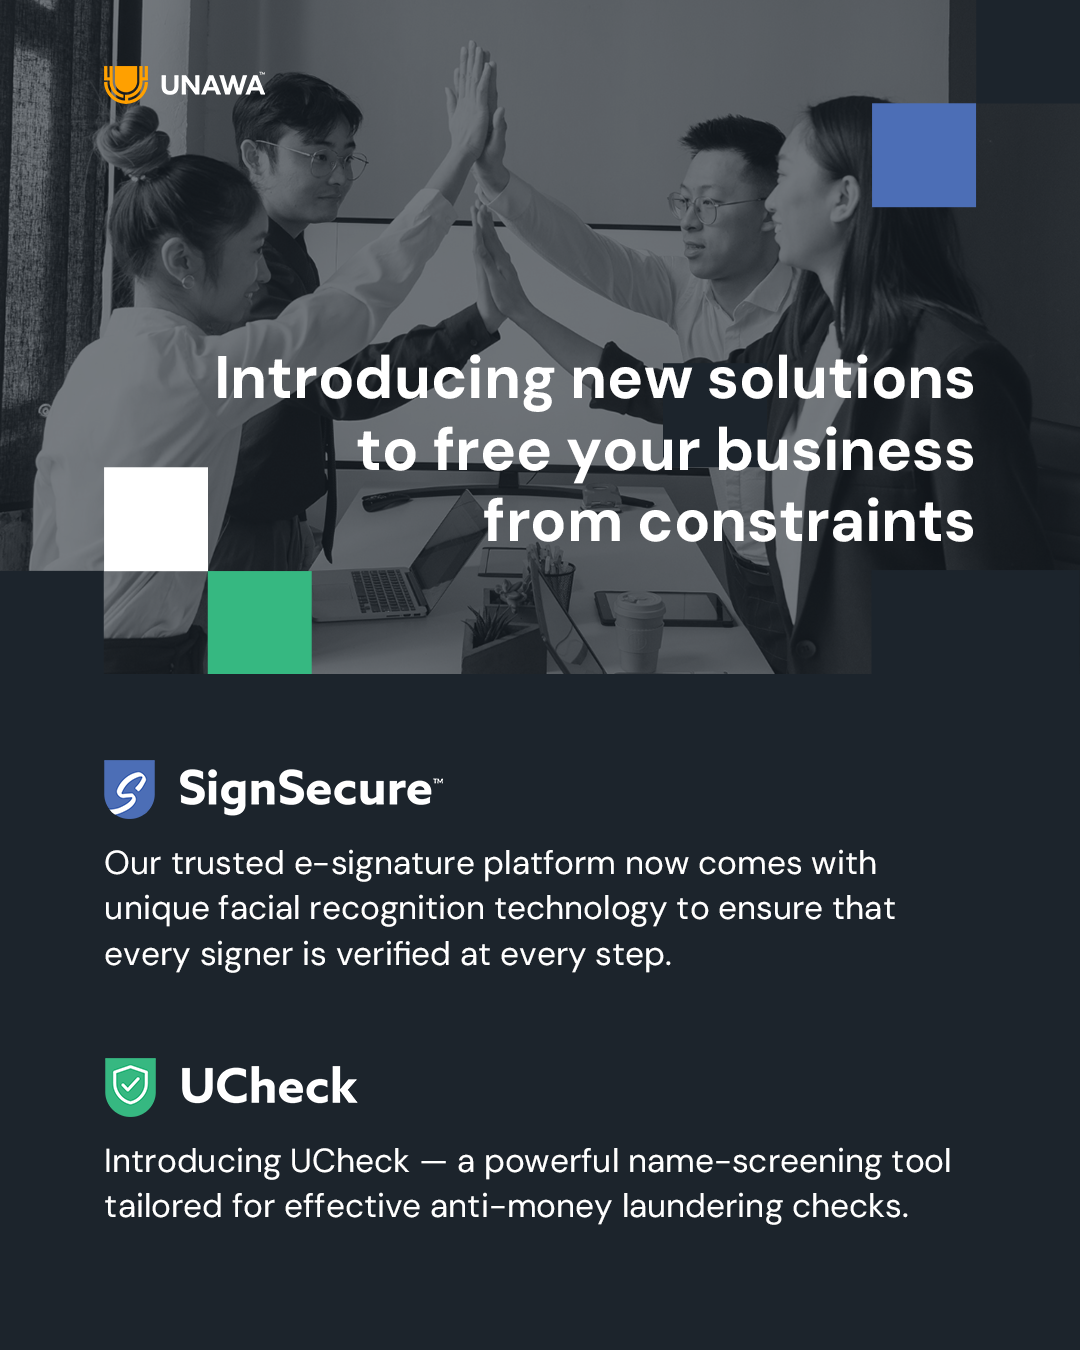 Let's celebrate FREEDOM from fraud with UCheck and FREEDOM from forgery with SignSecure!